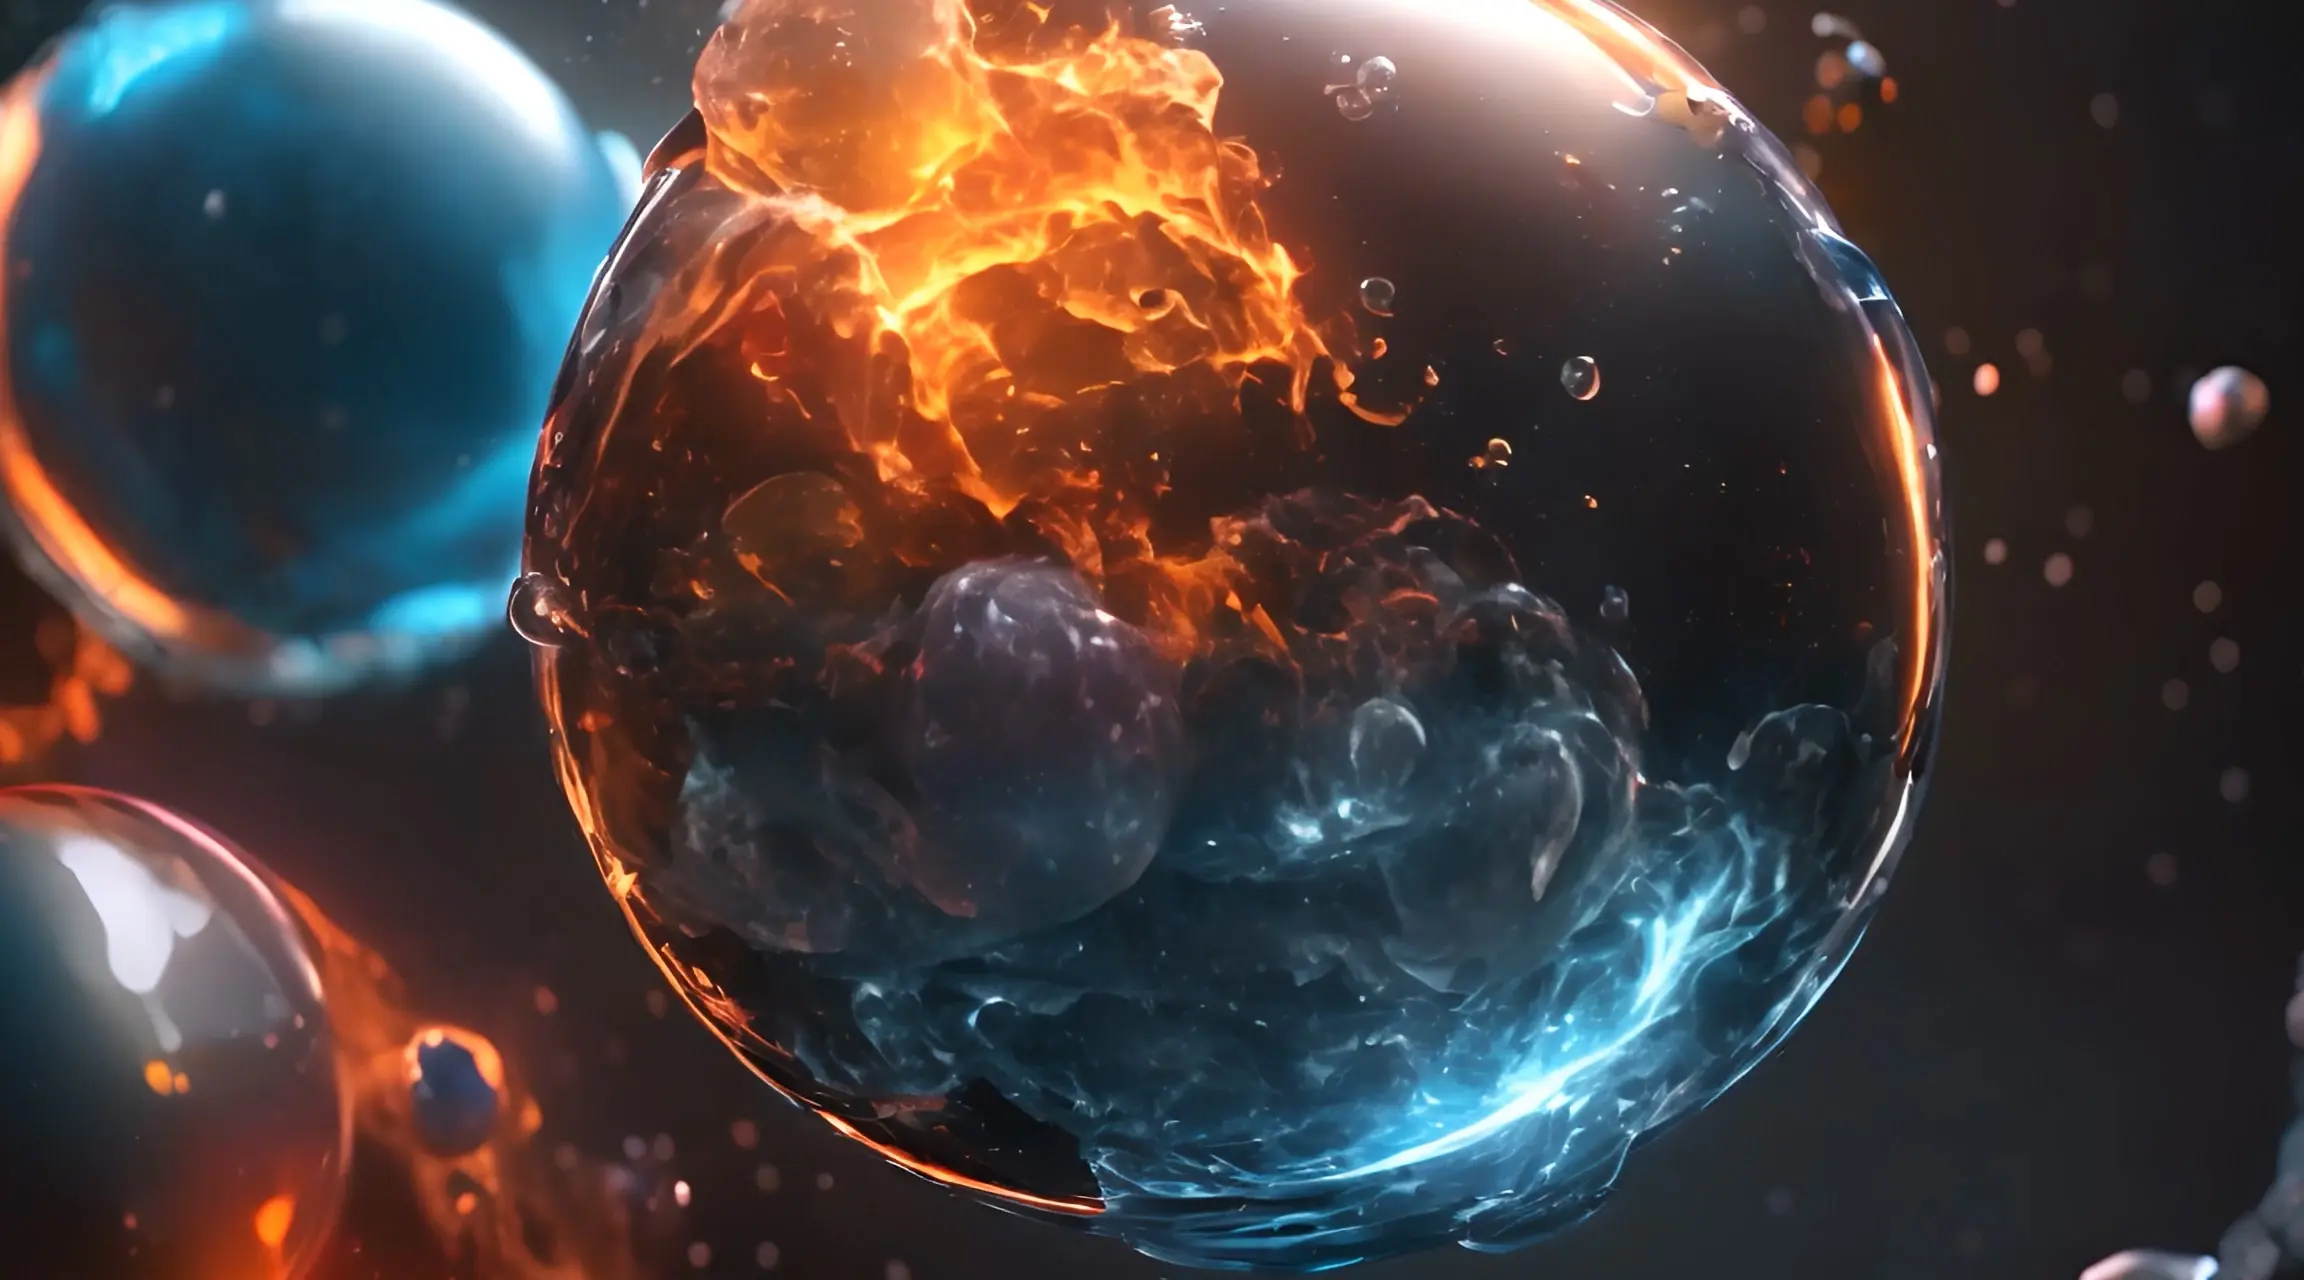 Fire and Ice Orb Dynamic Video Backdrop